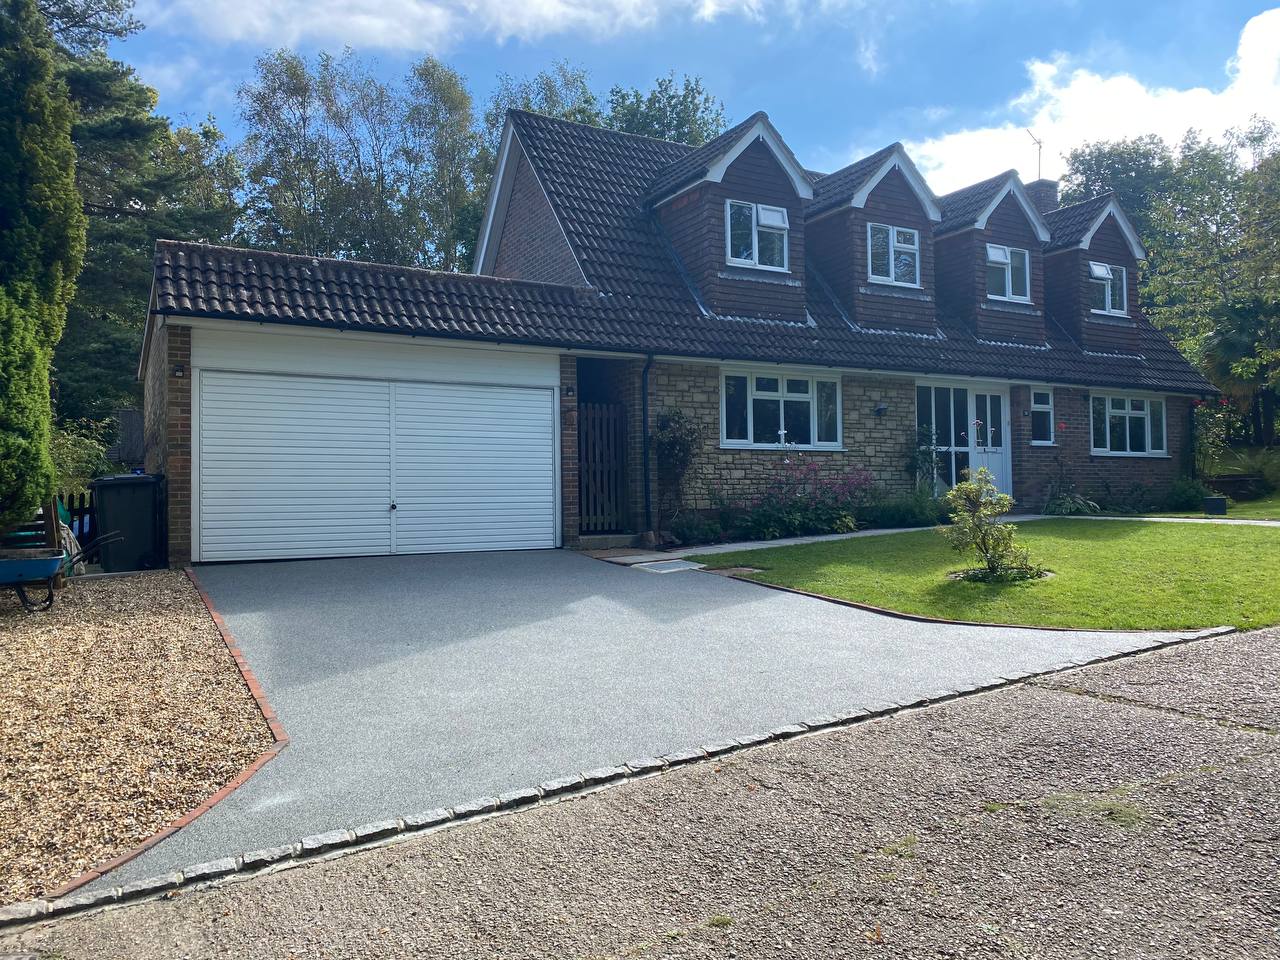 This is a photo of a resin driveway installed in Warrington by Warrington Resin Solutions